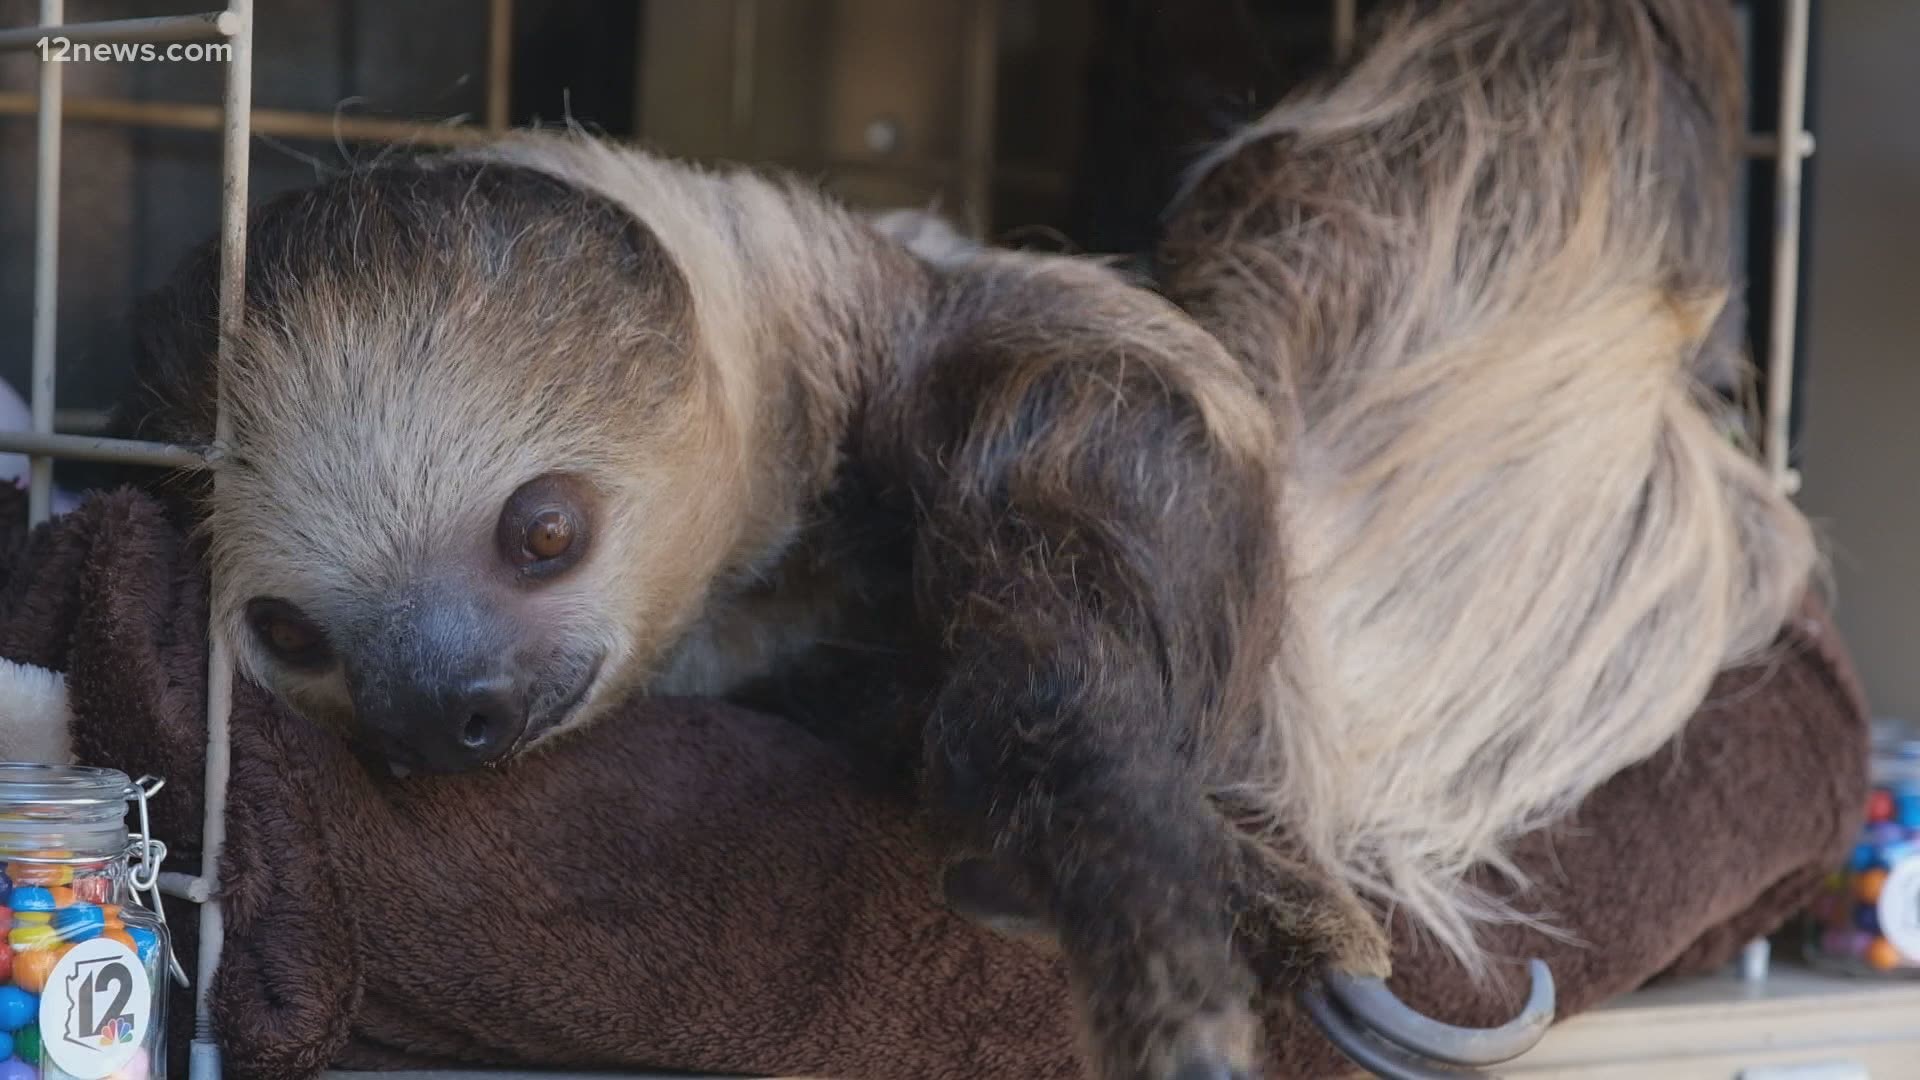 Phoenix Zoo offering personalized messages from sloth for Valentine's Day |  